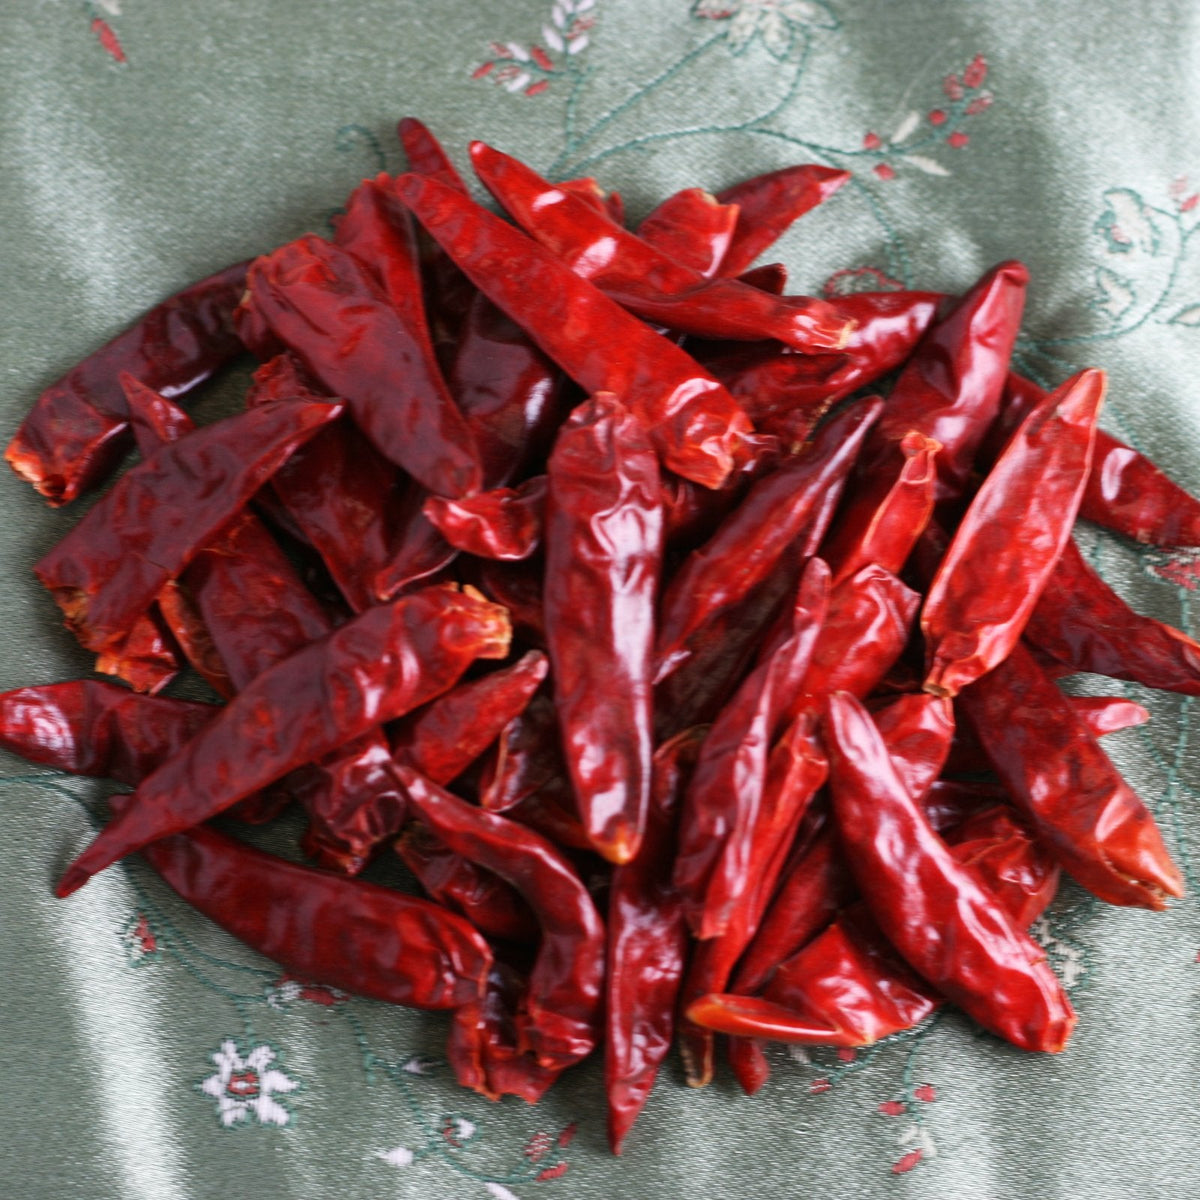 Tien Tsin Chiles (accounts only)